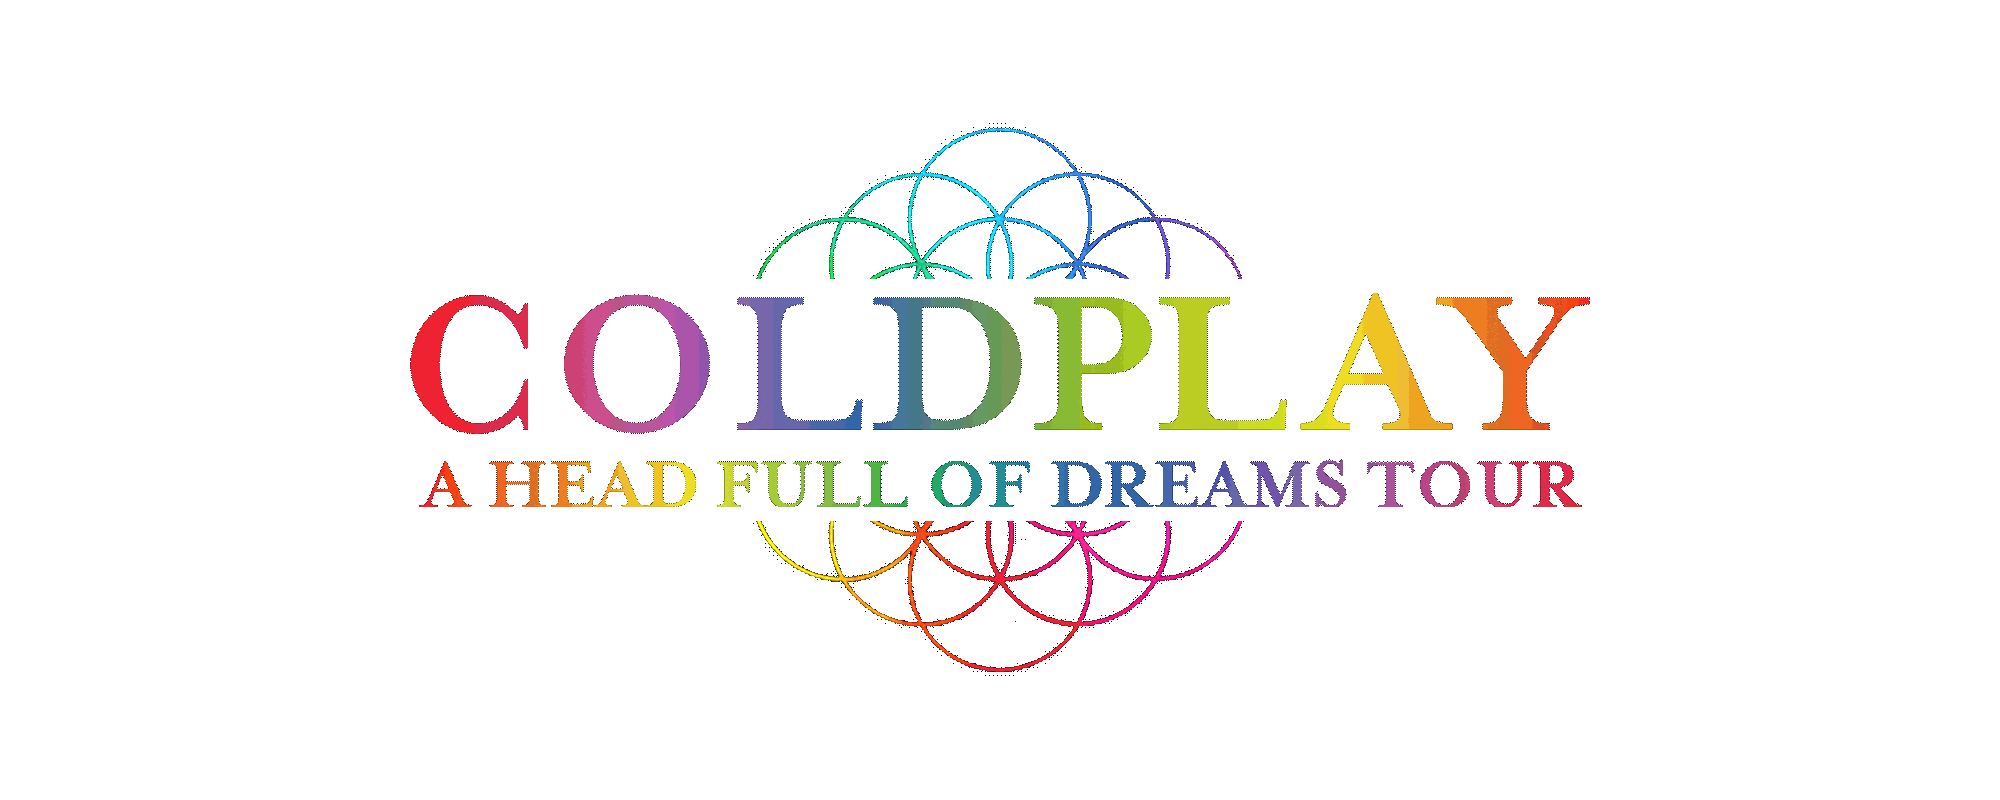 Coldplay Logo - Coldplay 2016 Tour